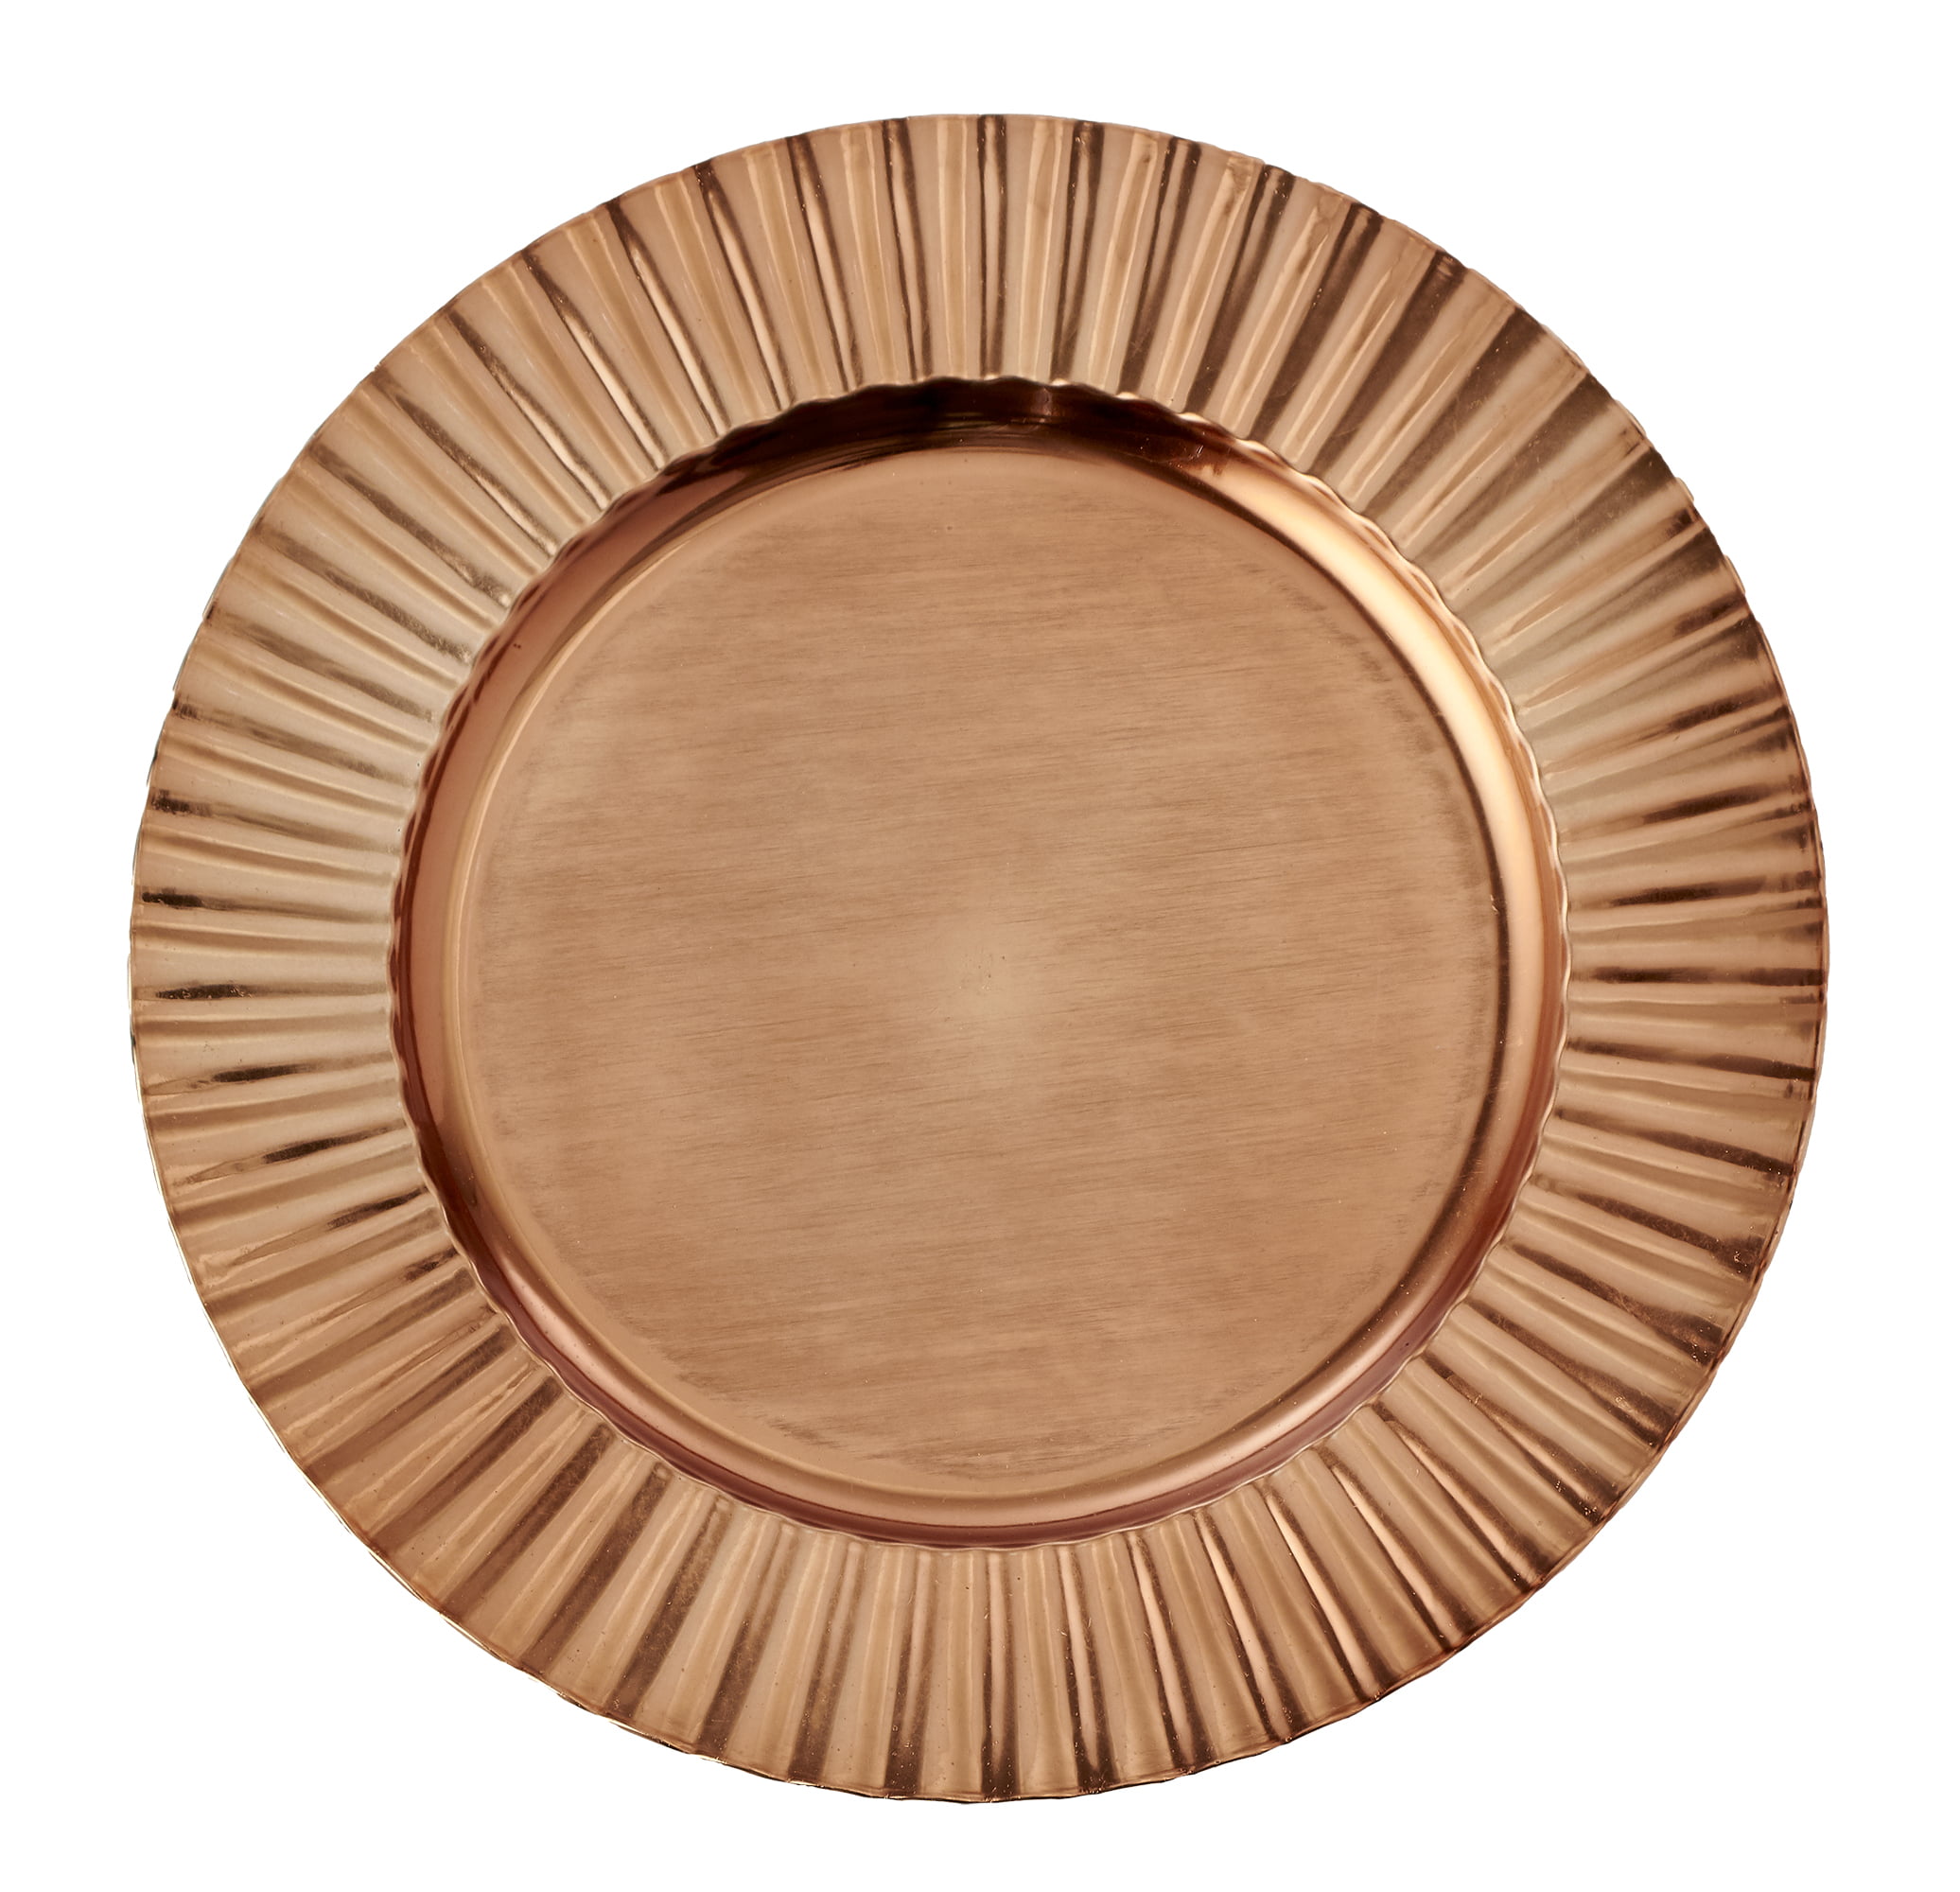 13 Inch Gold Heavy Duty Wedding Charger Plate With Fluted Edge 6-Pack 